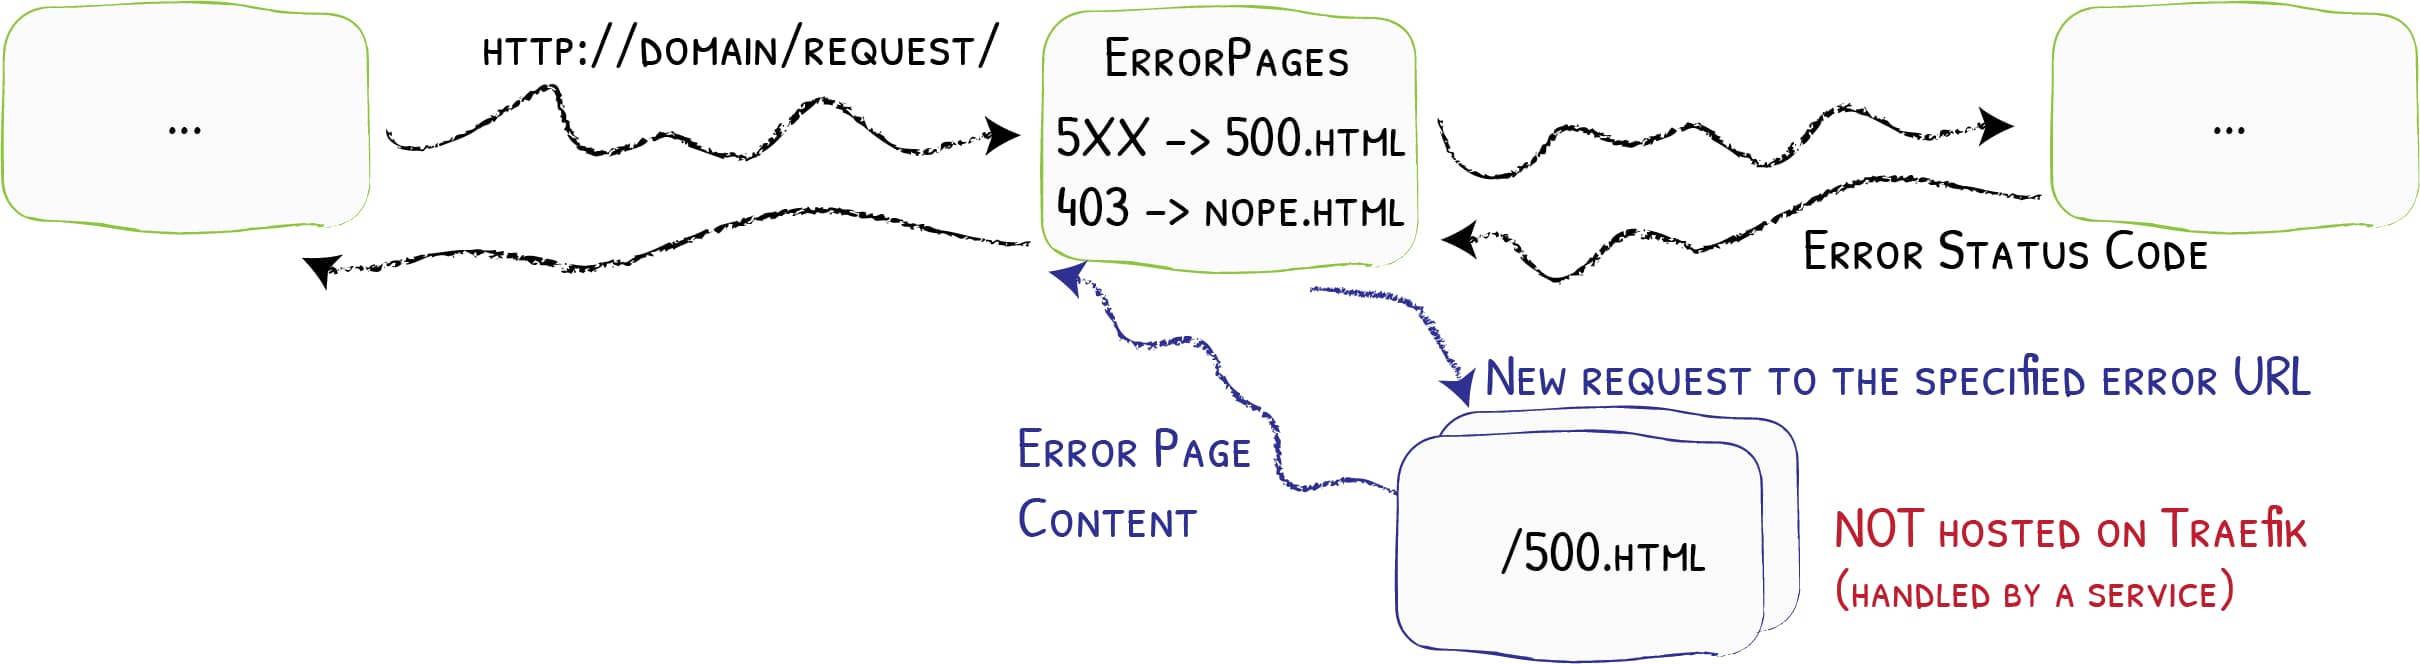 The ErrorPage middleware